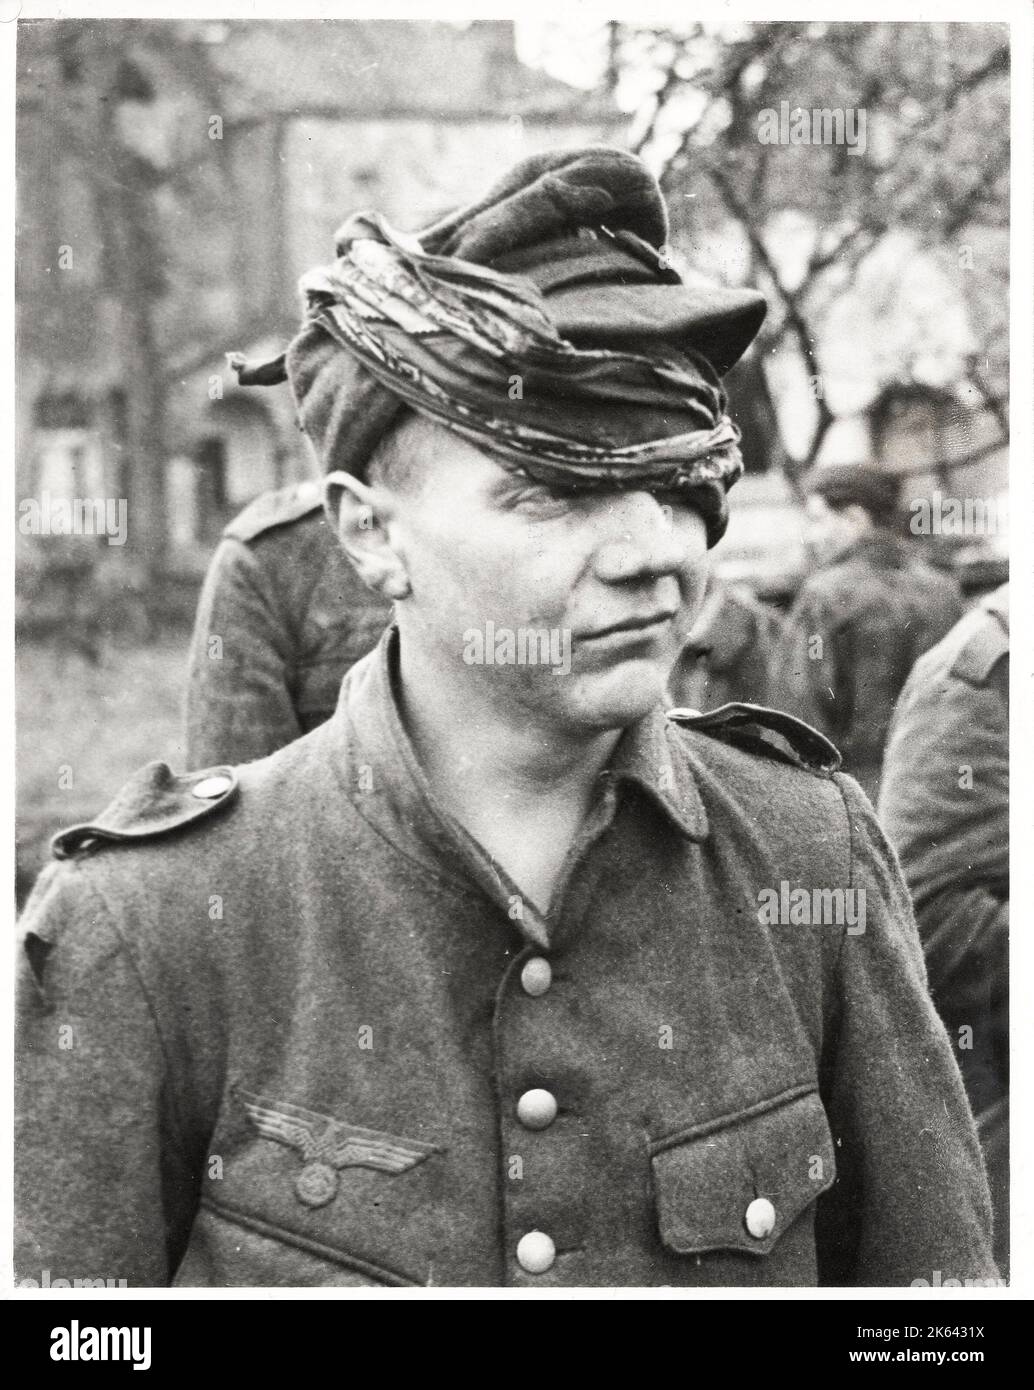 Vintage World War II photograph - a very young captured German soldier with an eye injury Stock Photo